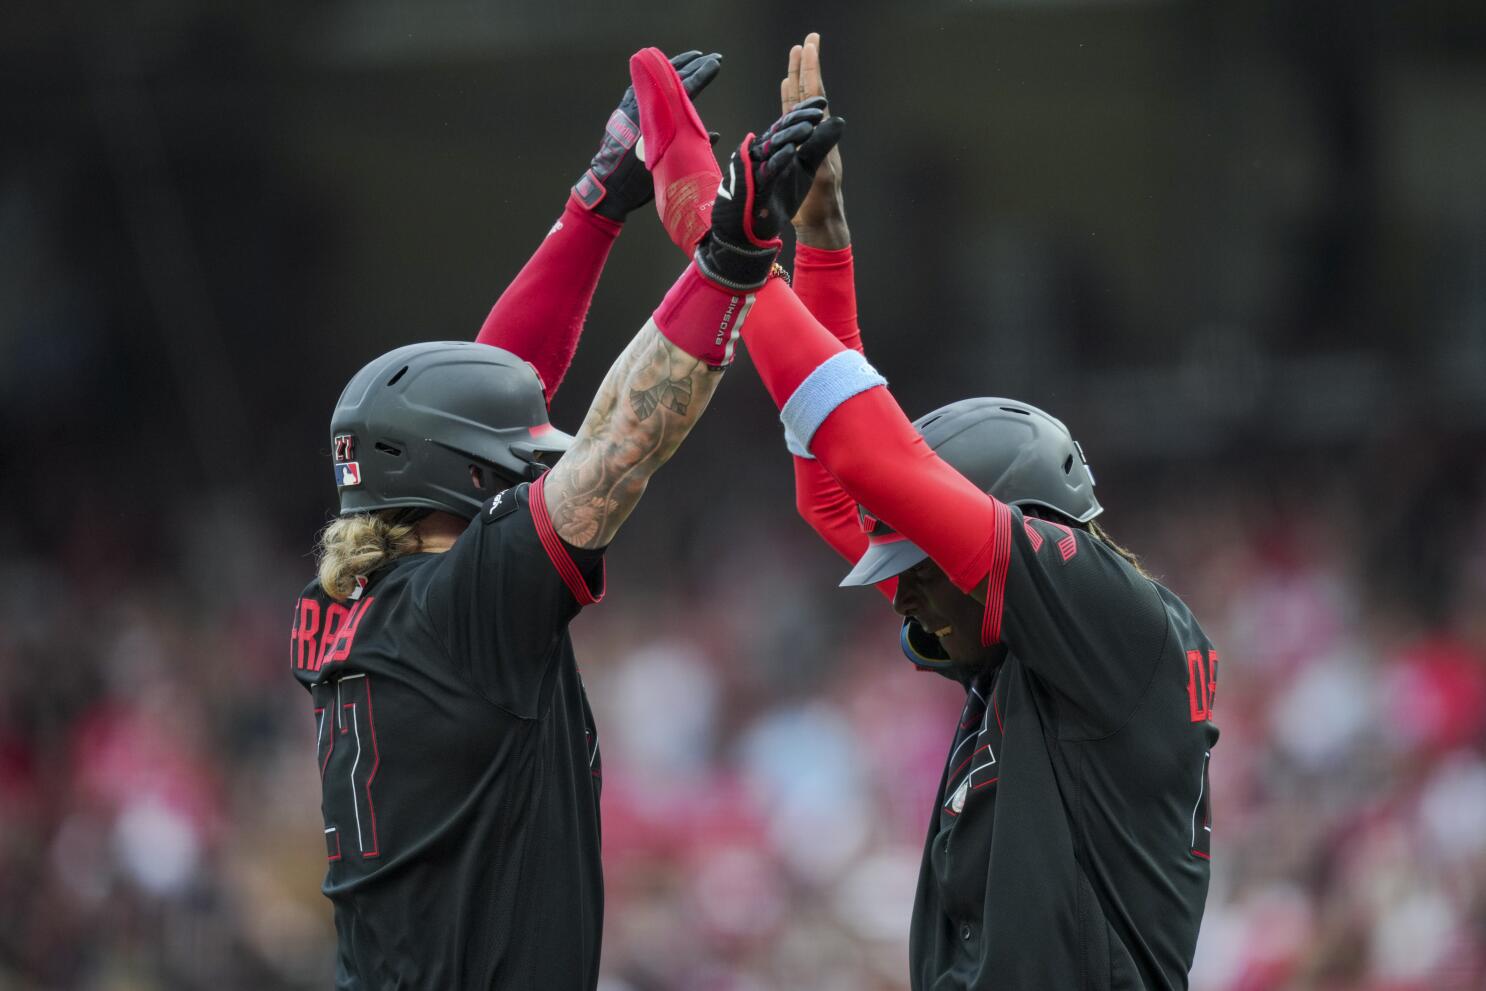 De La Cruz has cycle and Votto hits 2 HRs as Reds beat Braves 11-10 for  12th straight win - The San Diego Union-Tribune